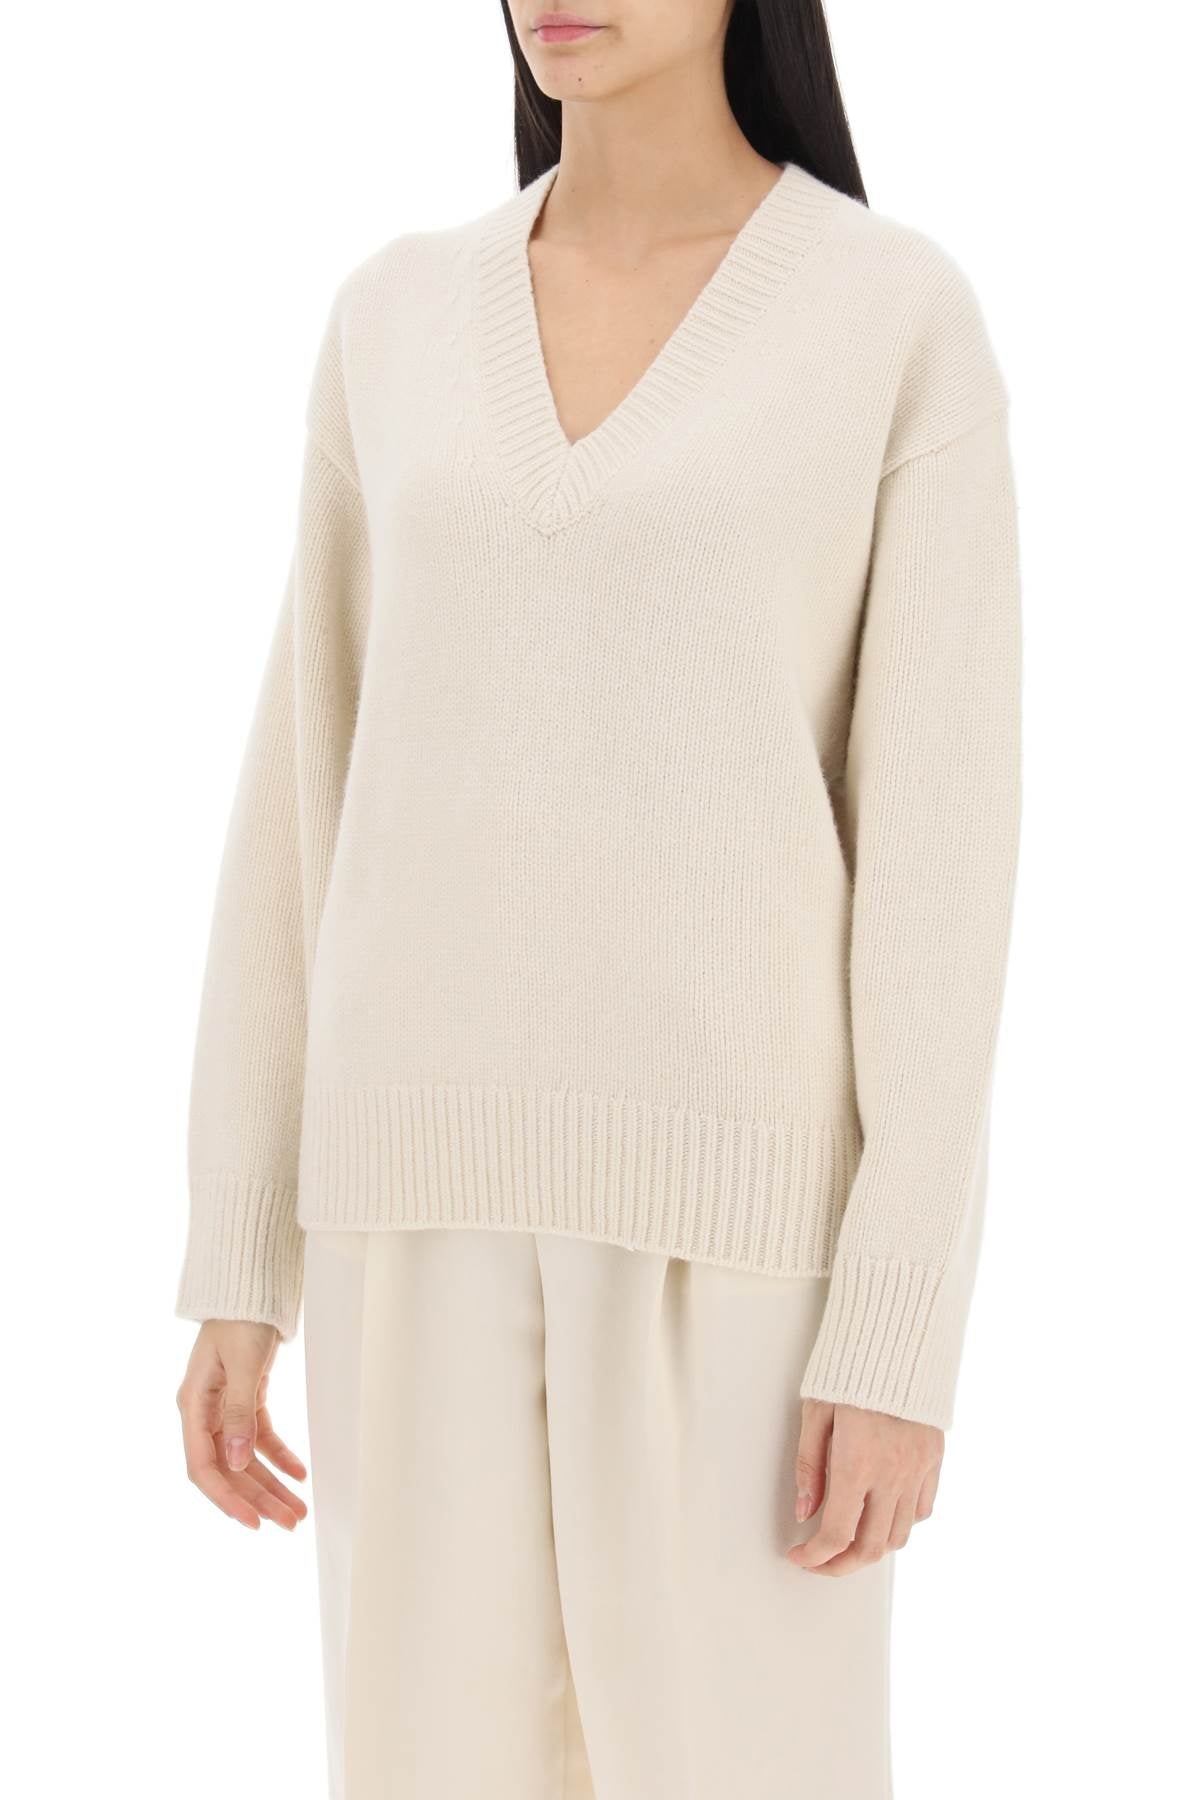 Toteme Wool And Cashmere Sweater Women - 4